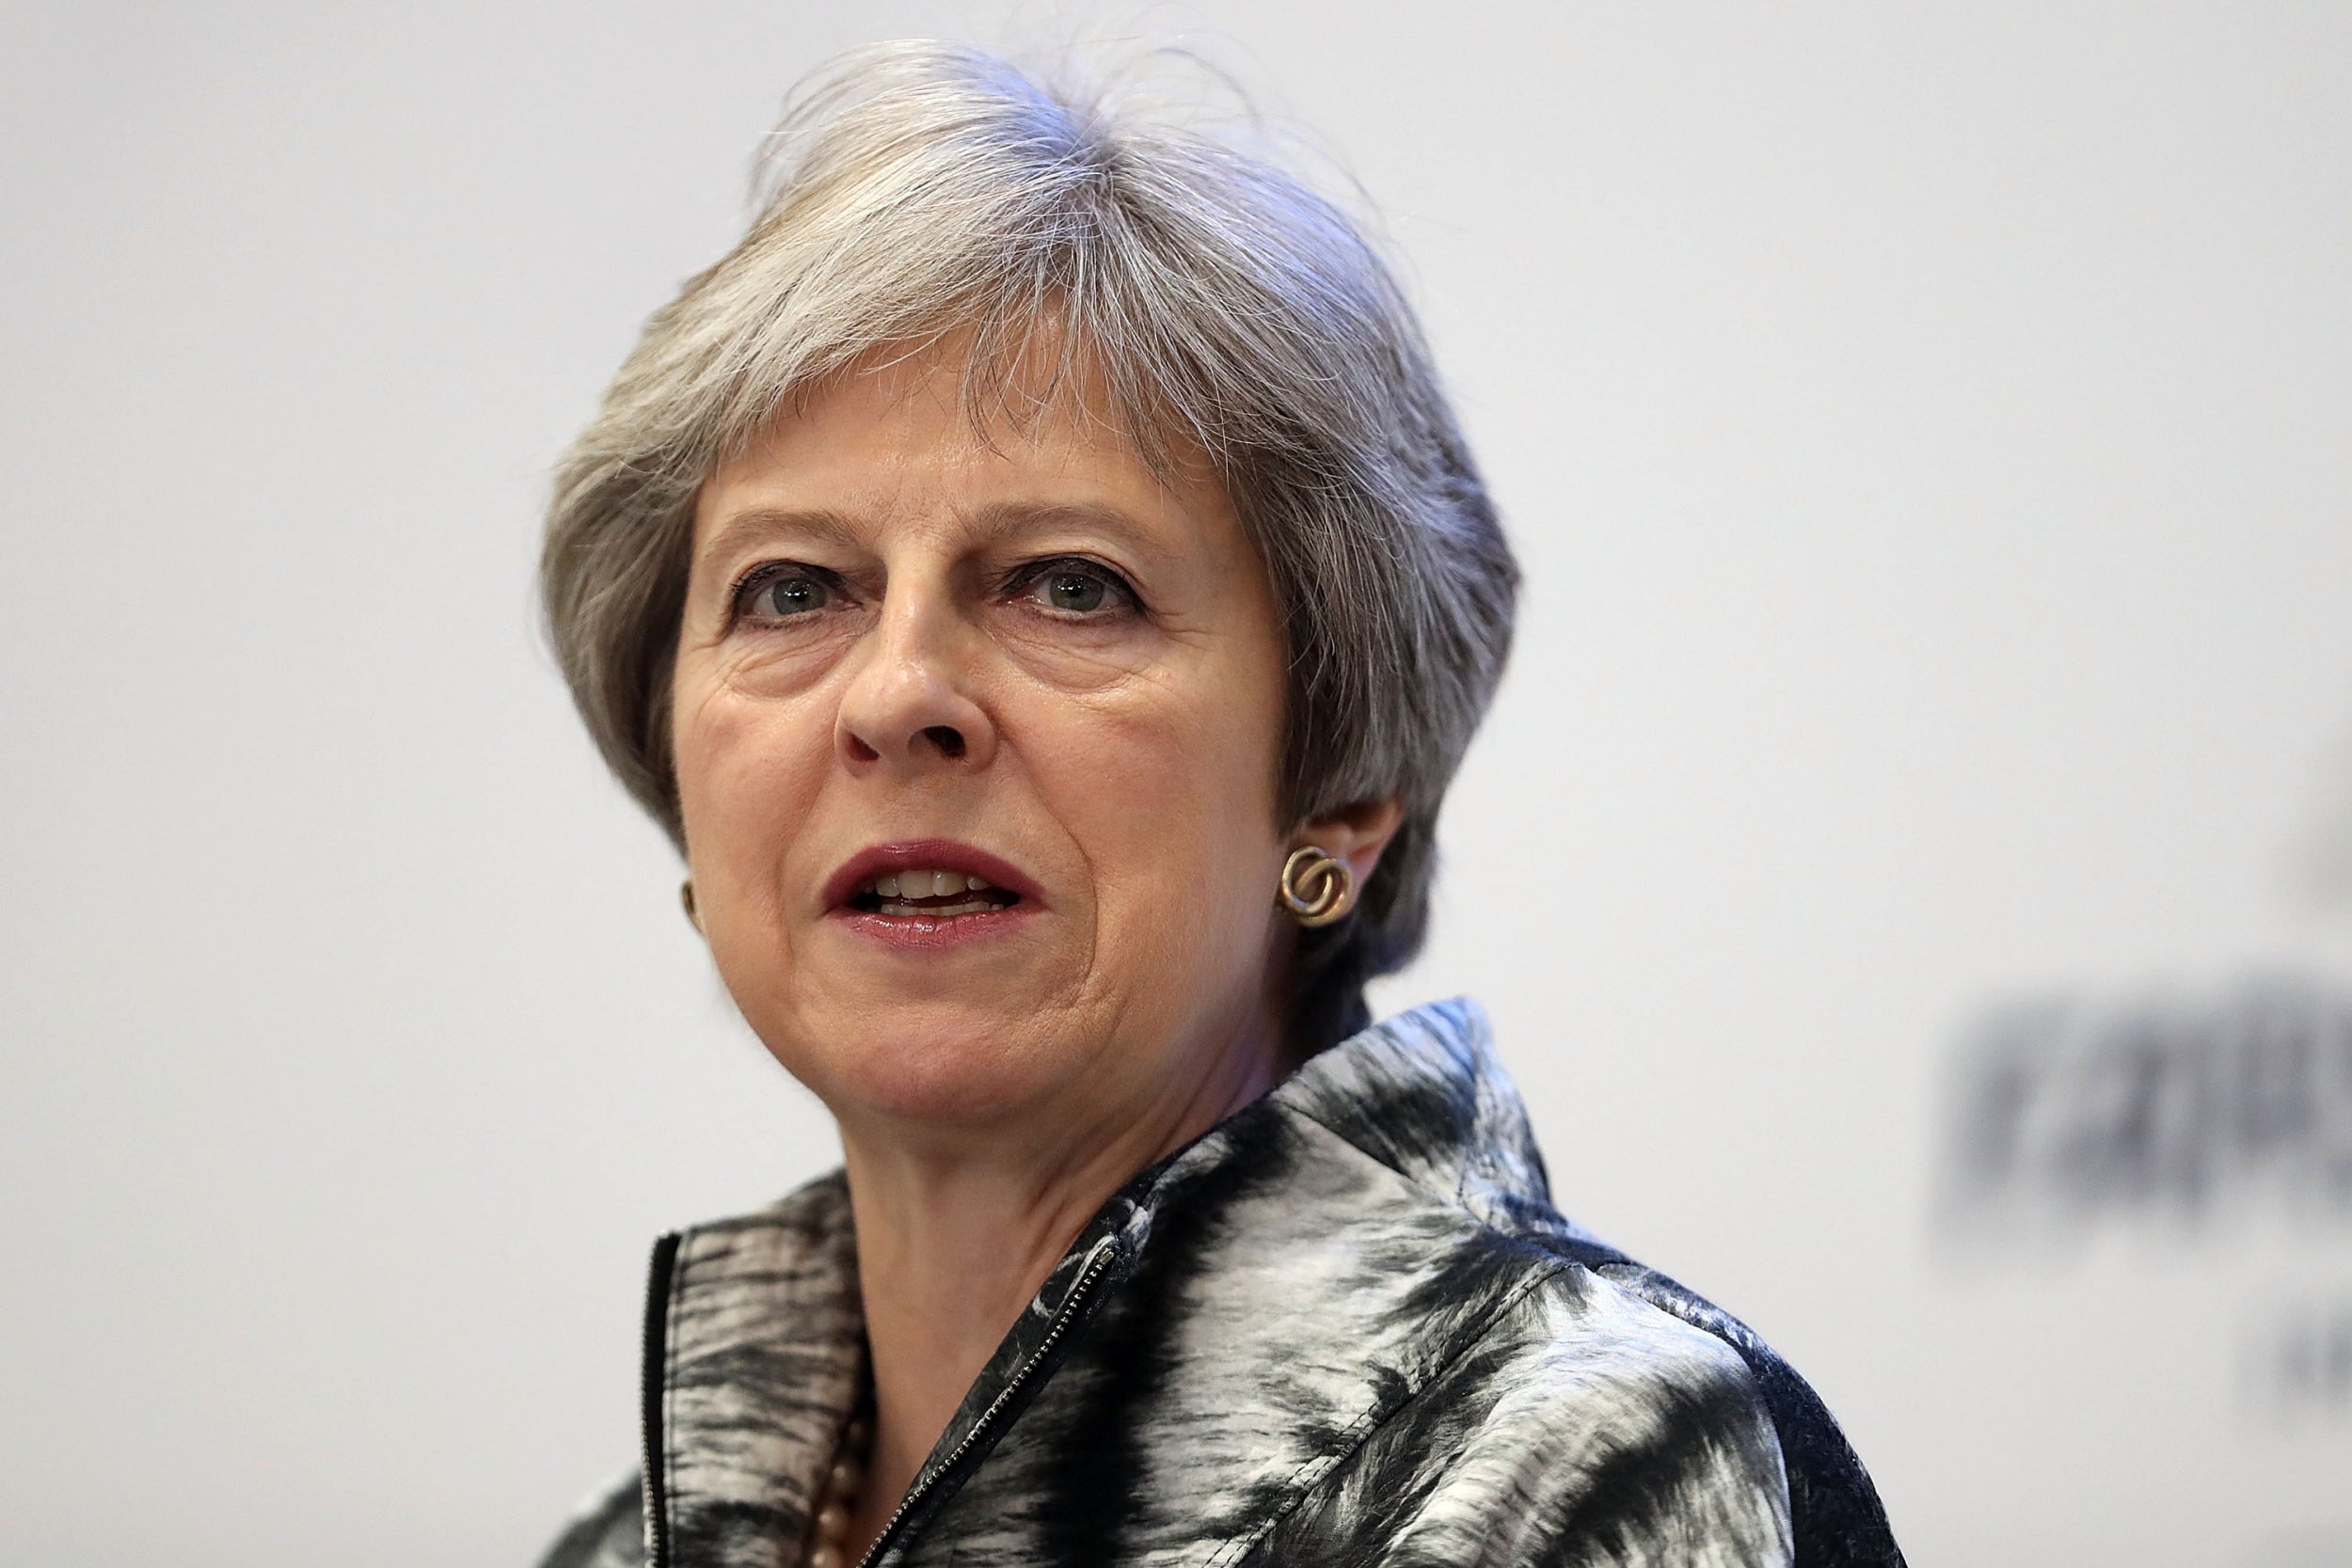 Theresa May has come under mounting pressure from Tory Brexiteers furious at her Brexit strategy